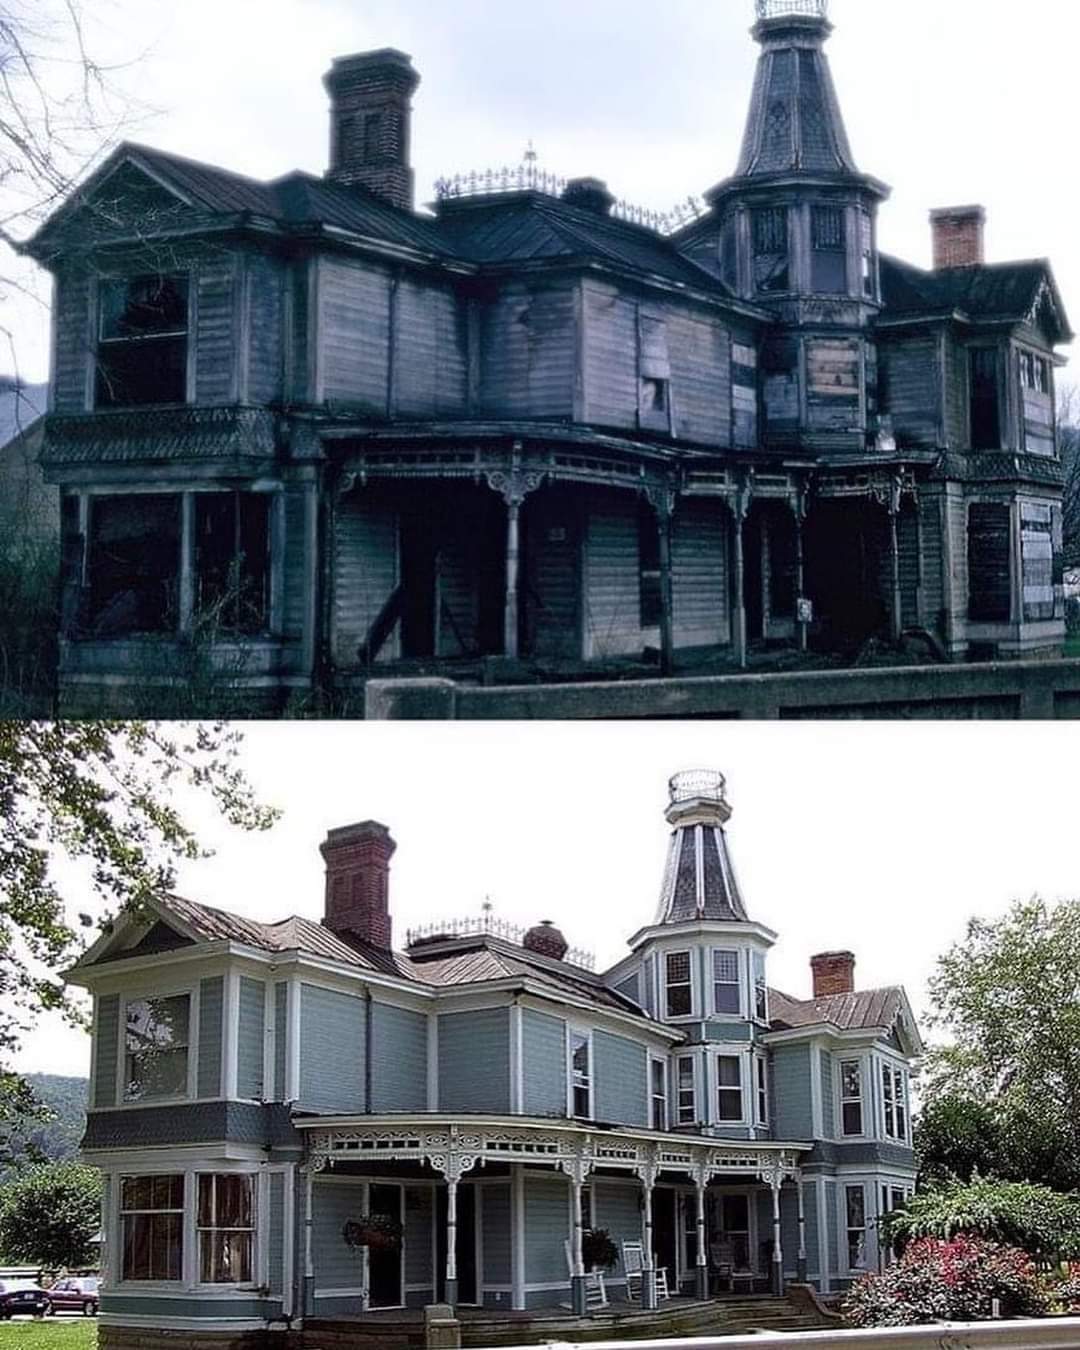 An Abandoned Victorian Home Has Been Dramatically Restored In Rarden, Ohio, USA